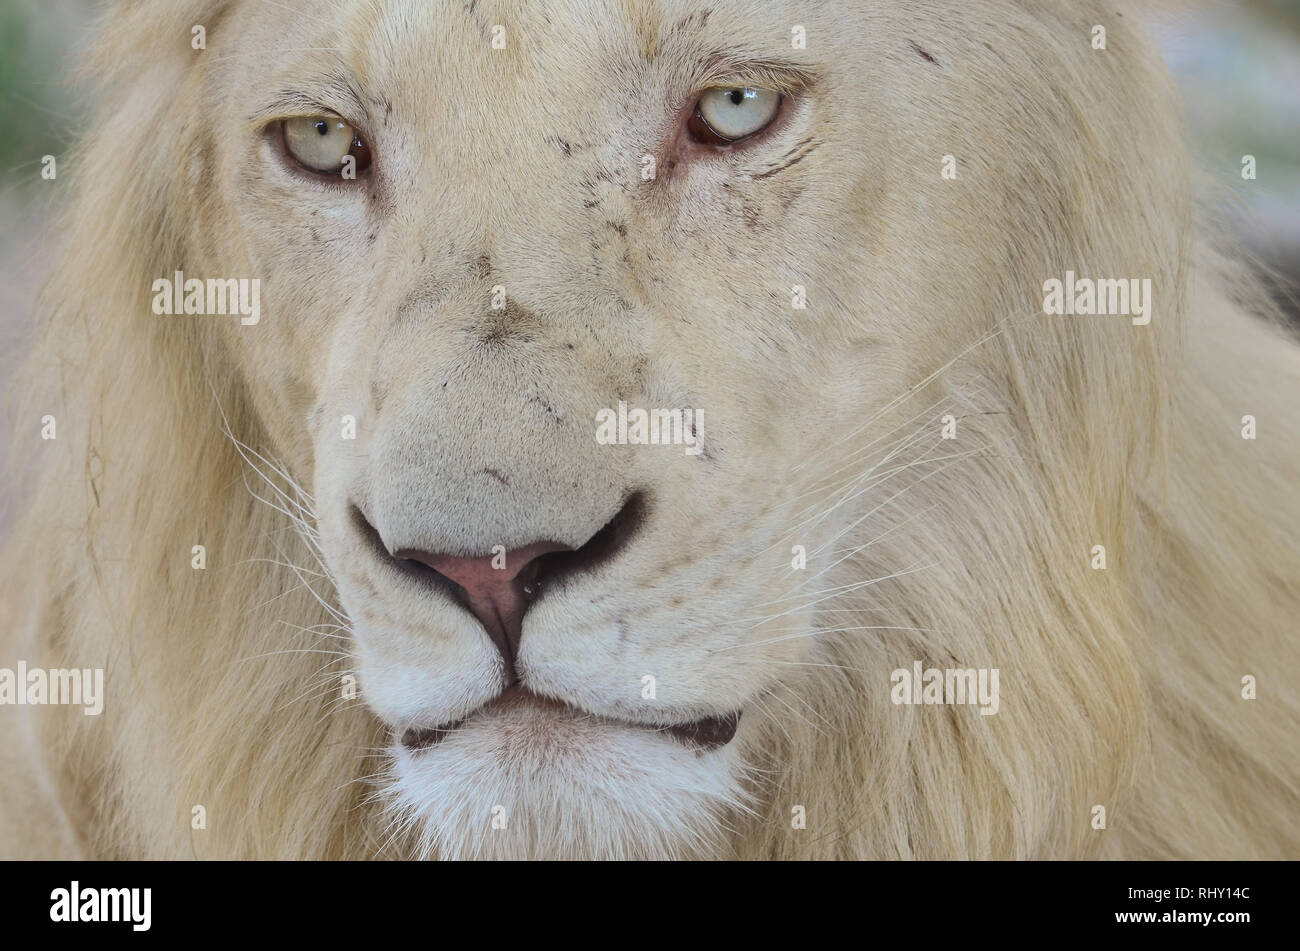 Young white lion, melancholic and lost in thougths after an afternoon nap, portrait, close up view Stock Photo